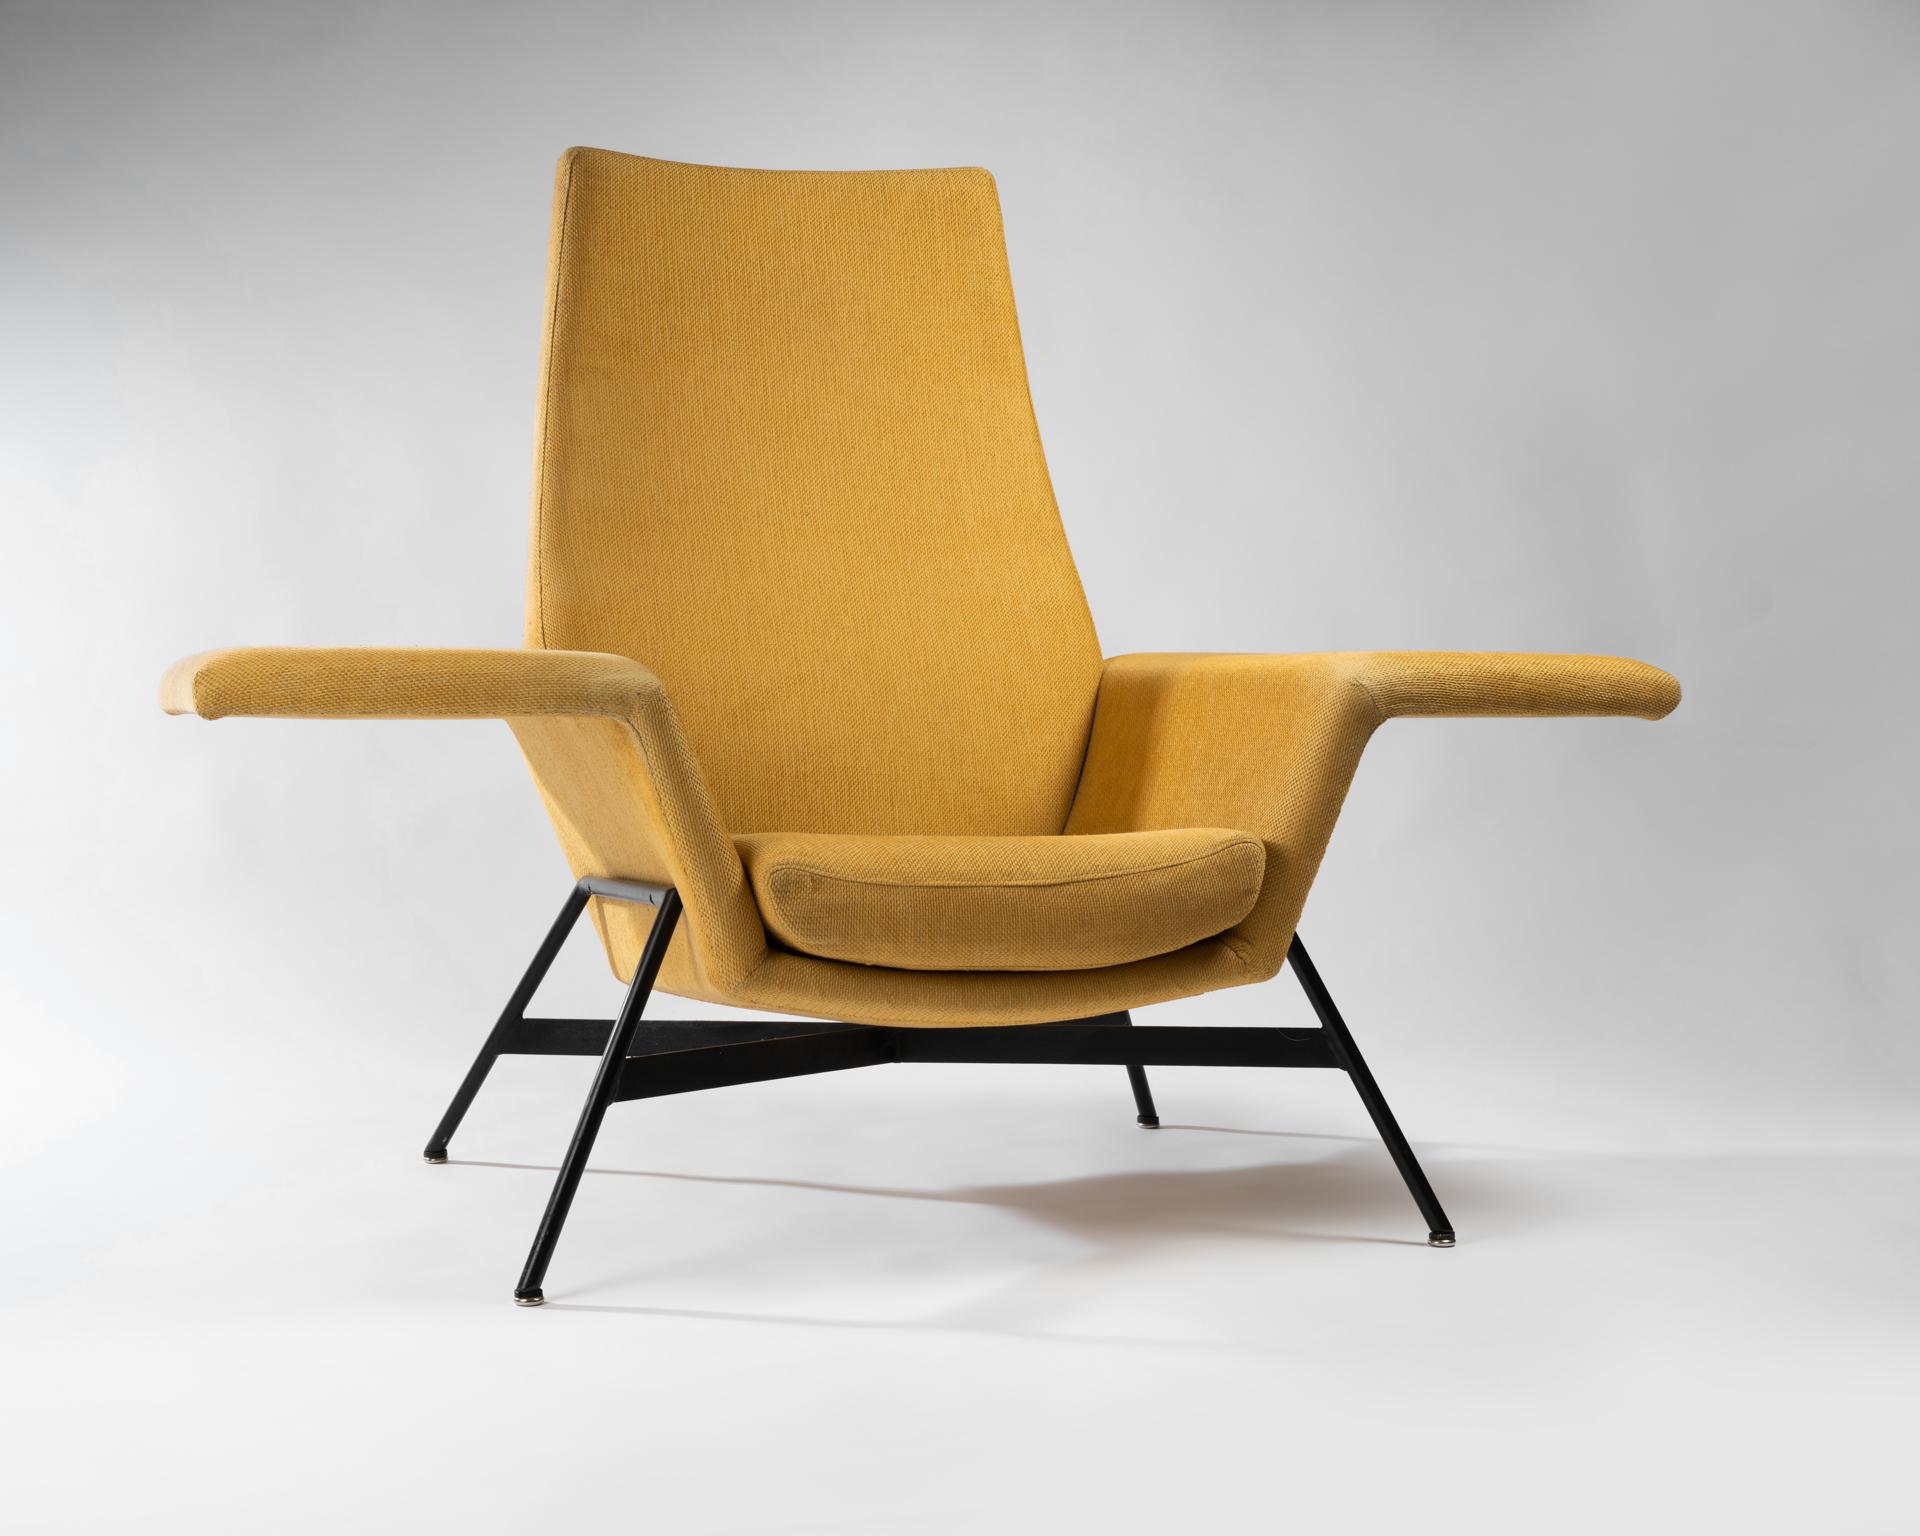 This very rare easy chair was designed in 1961 by Otto & Ridi Kolb and Produced by Walter Knoll in America. The Easy chair is extremely comfortable and practical thanks to its very wide armrests can be used as integrated side tables.